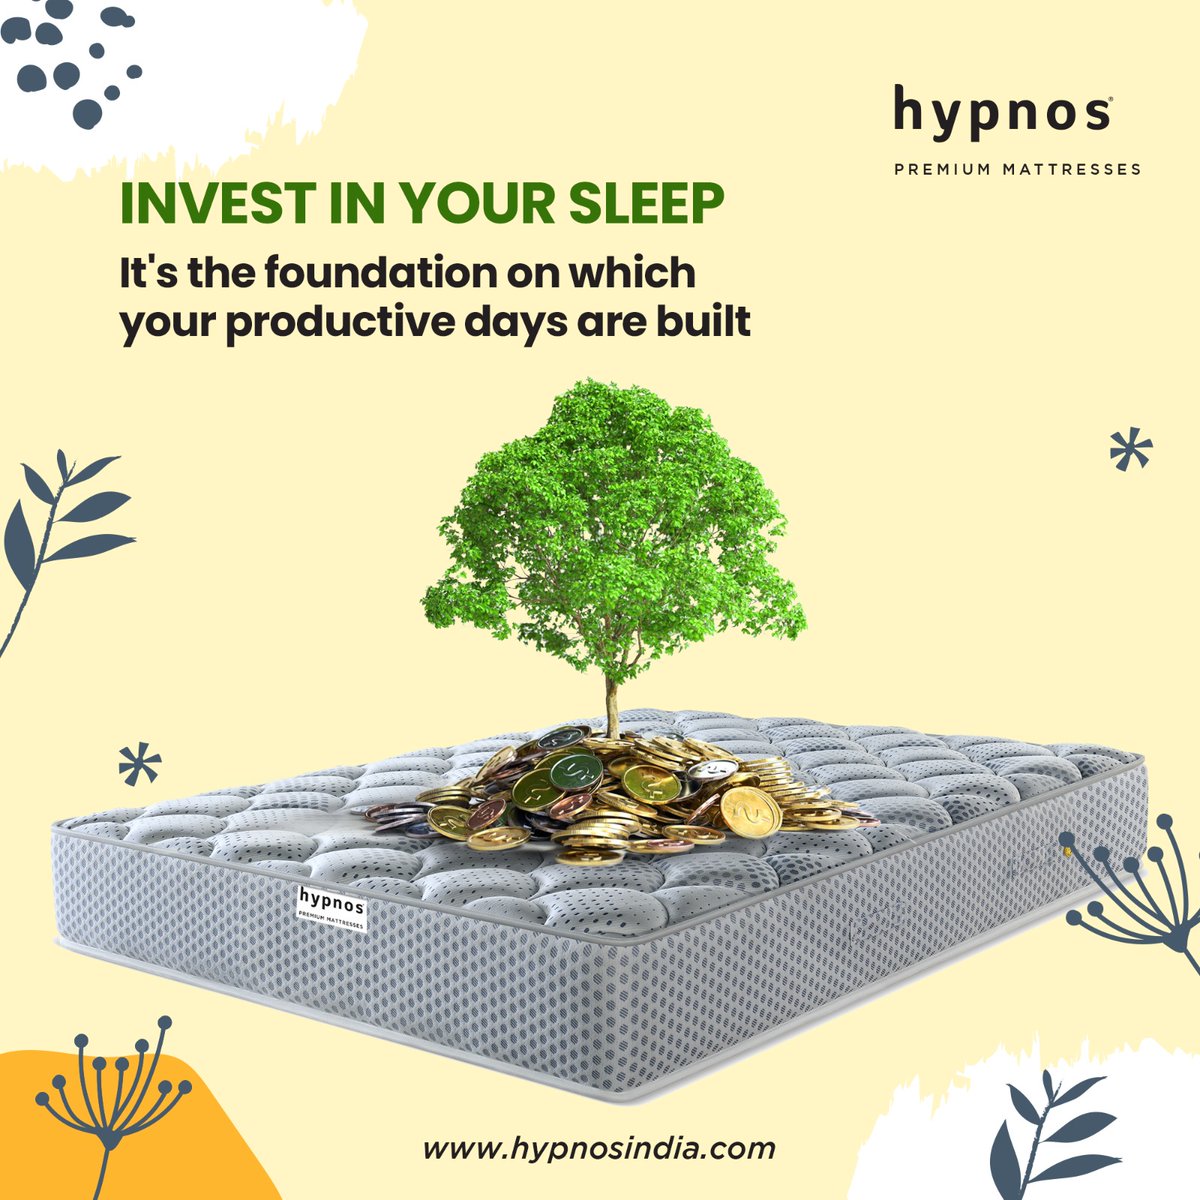 Be the wisest and invest in Hypnos

Visit: hypnosindia.com

#wise #investment #sleep #greatinvestment #investinsleep #hypnos #hypnosmattress #hypnosindia #premiummattress #pocketedspring #springmattress #comfort #softmattress #cozynights